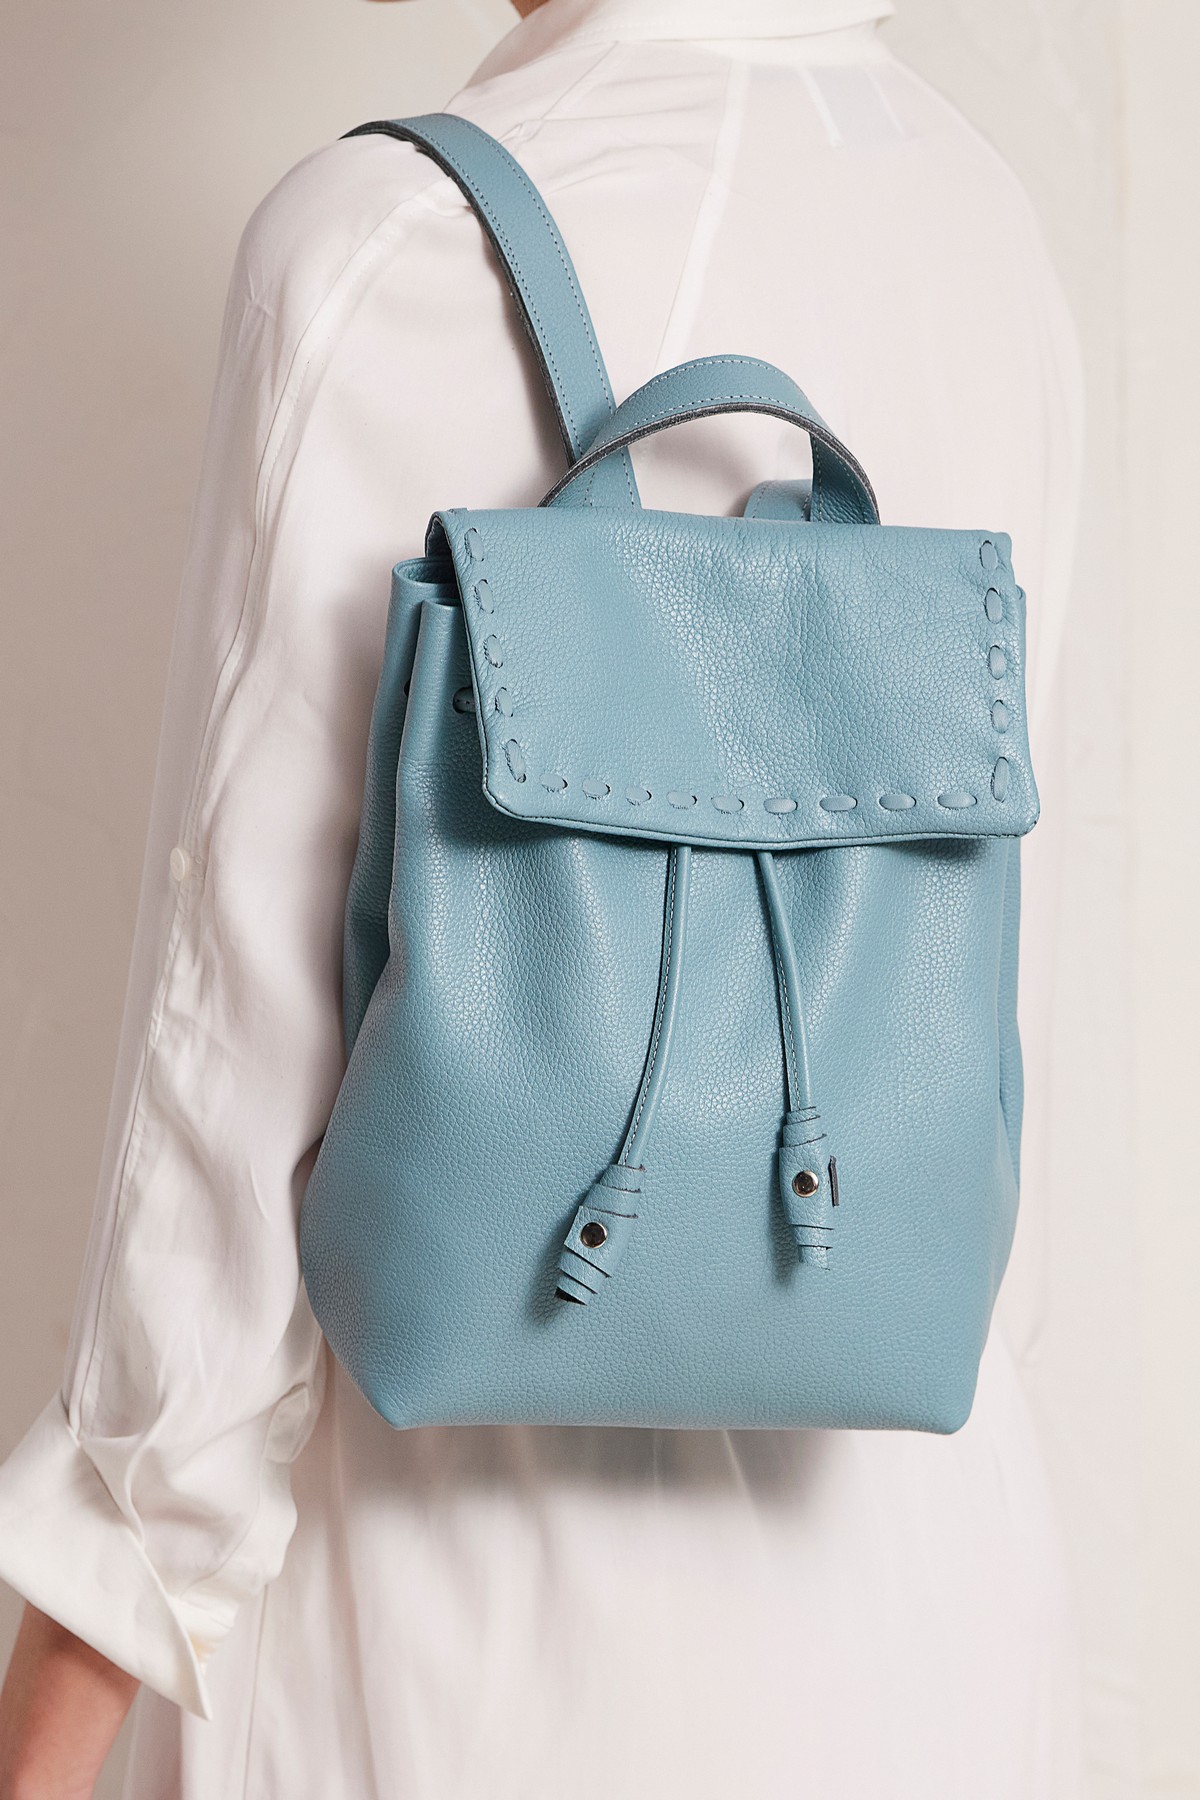 blue leather backpack purse